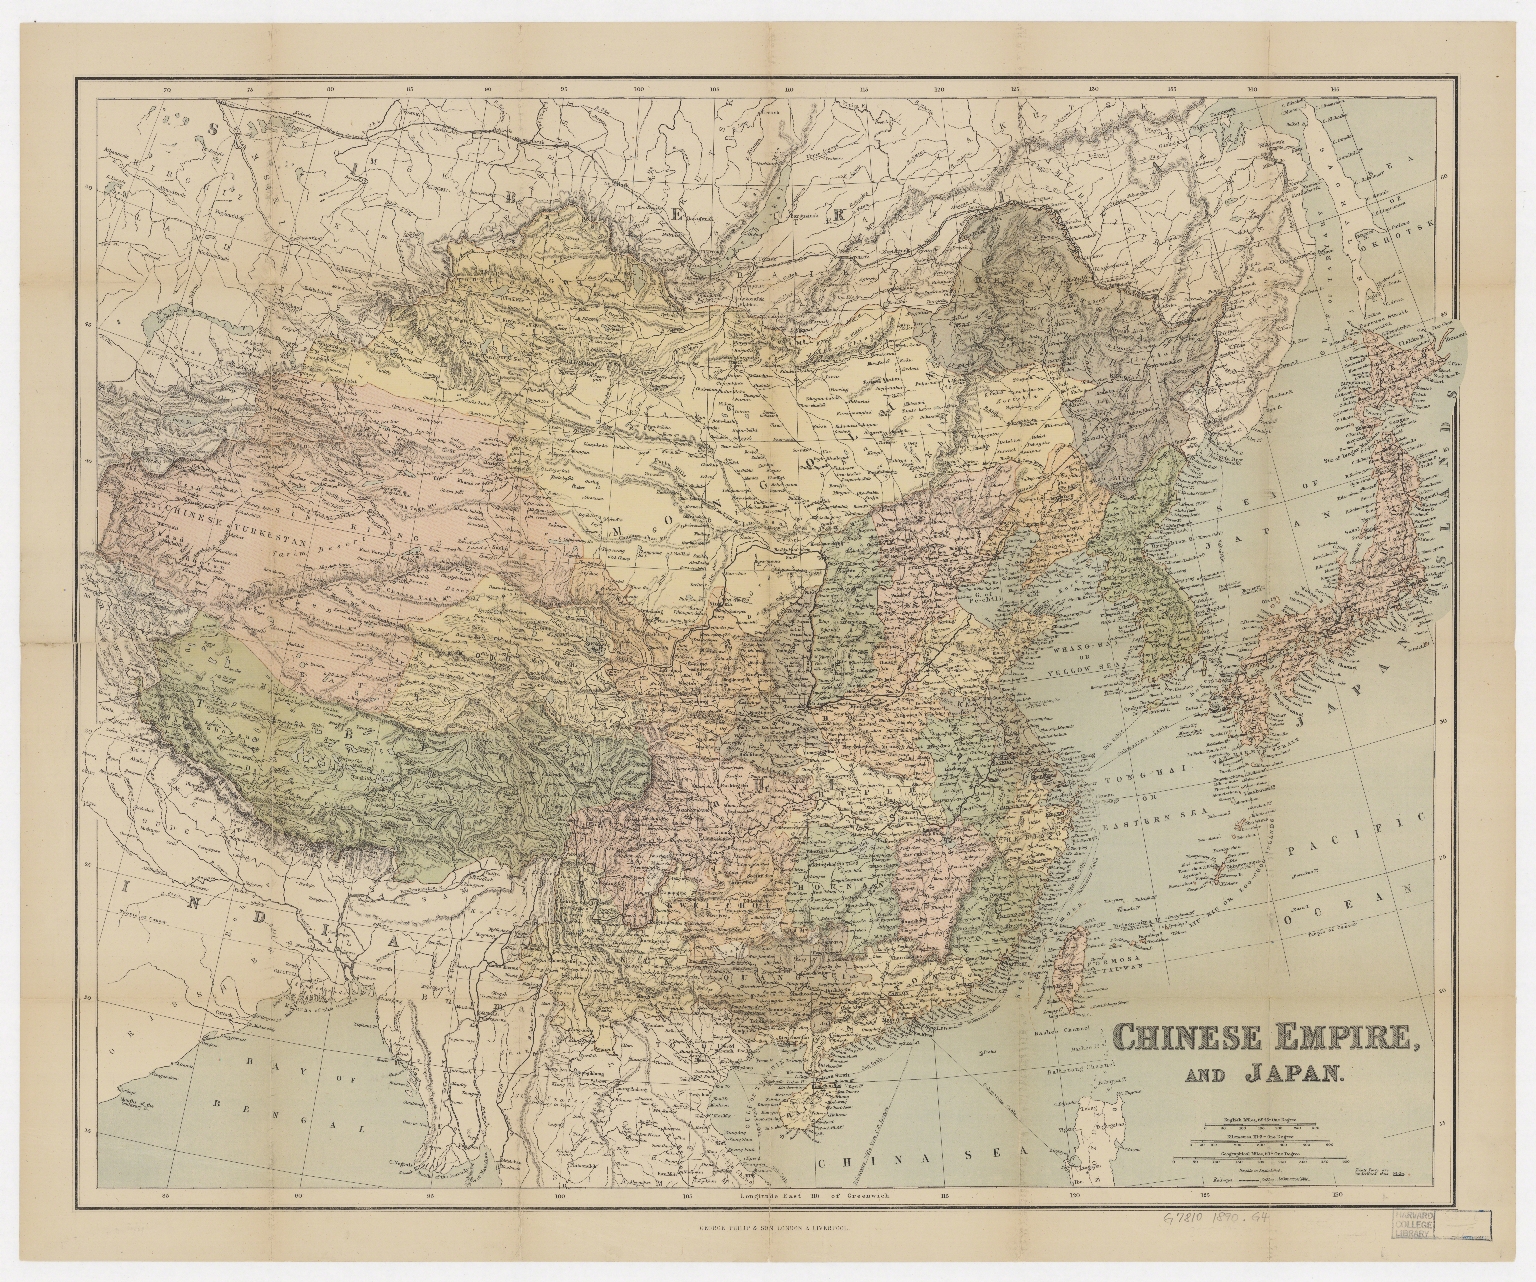 Chinese empire, and Japan